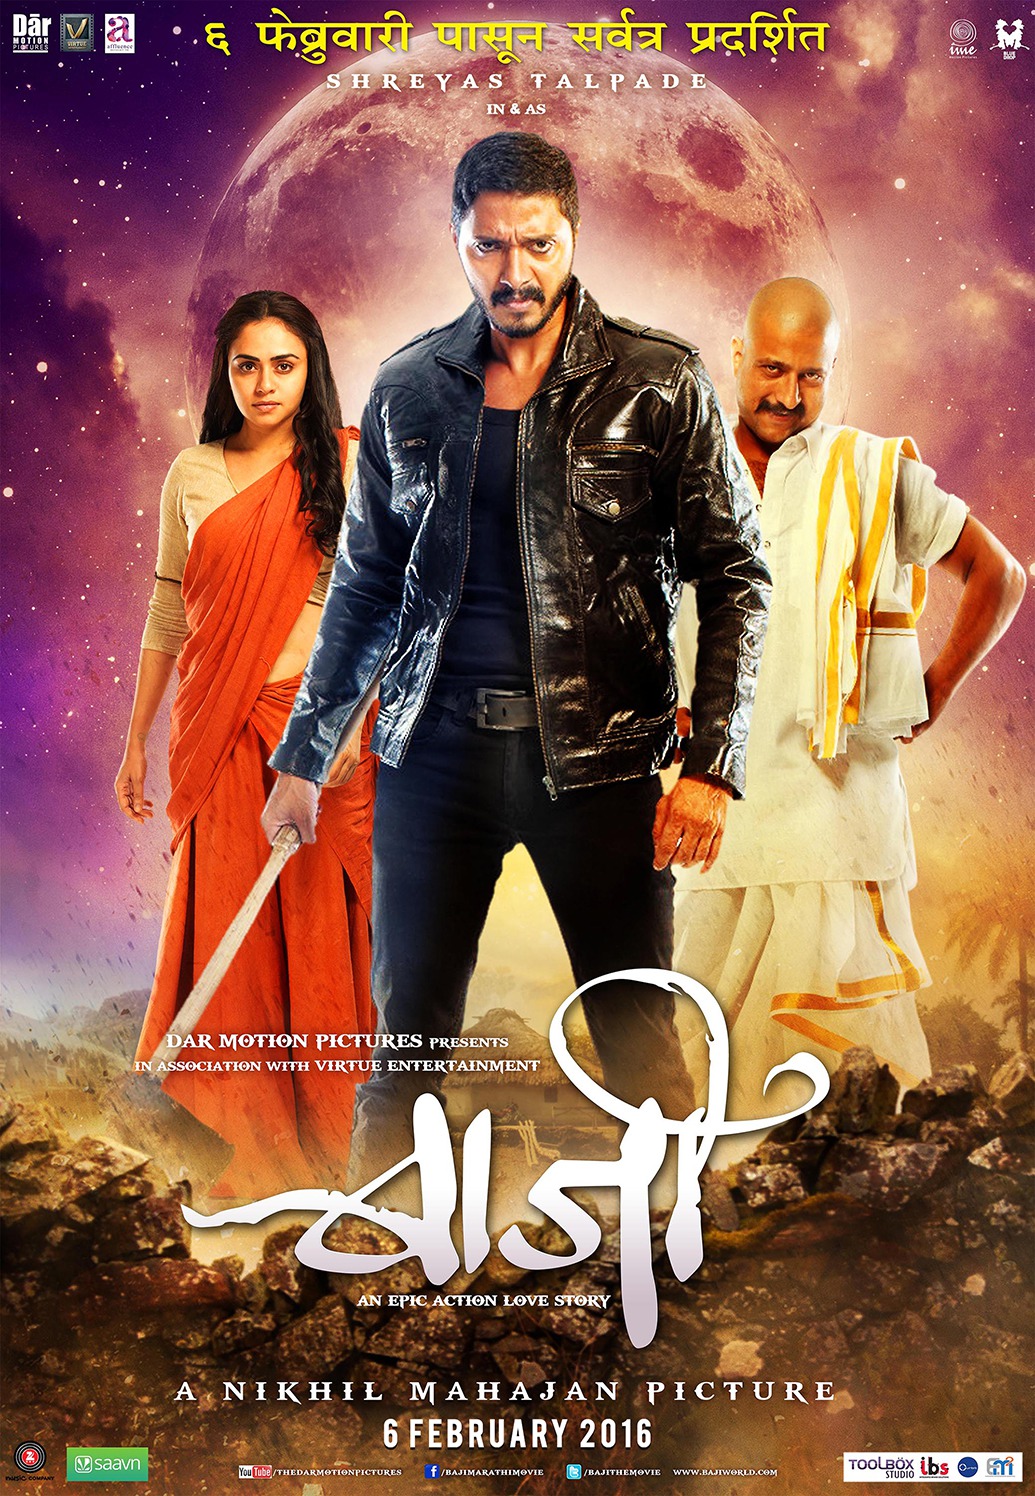 Extra Large Movie Poster Image for Baji (#6 of 11)